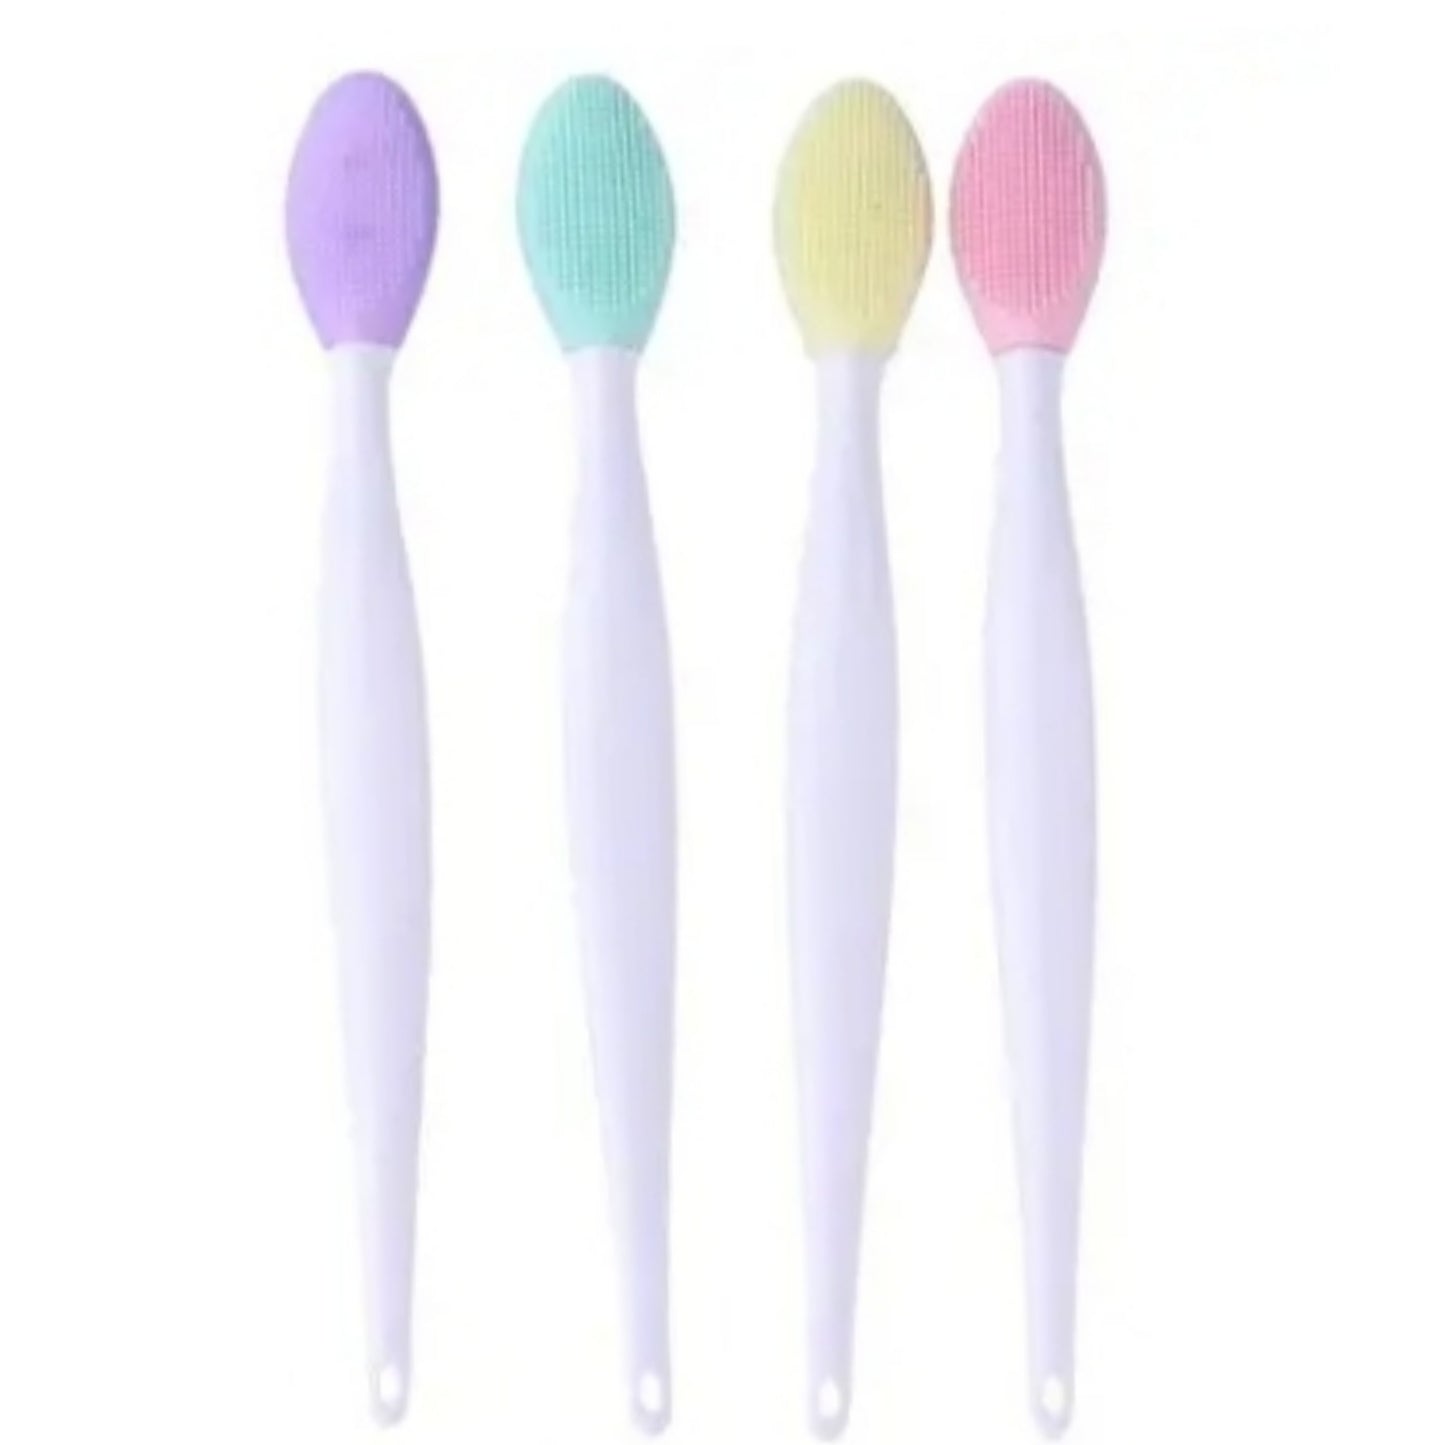 2x pack silicon Toothbrush